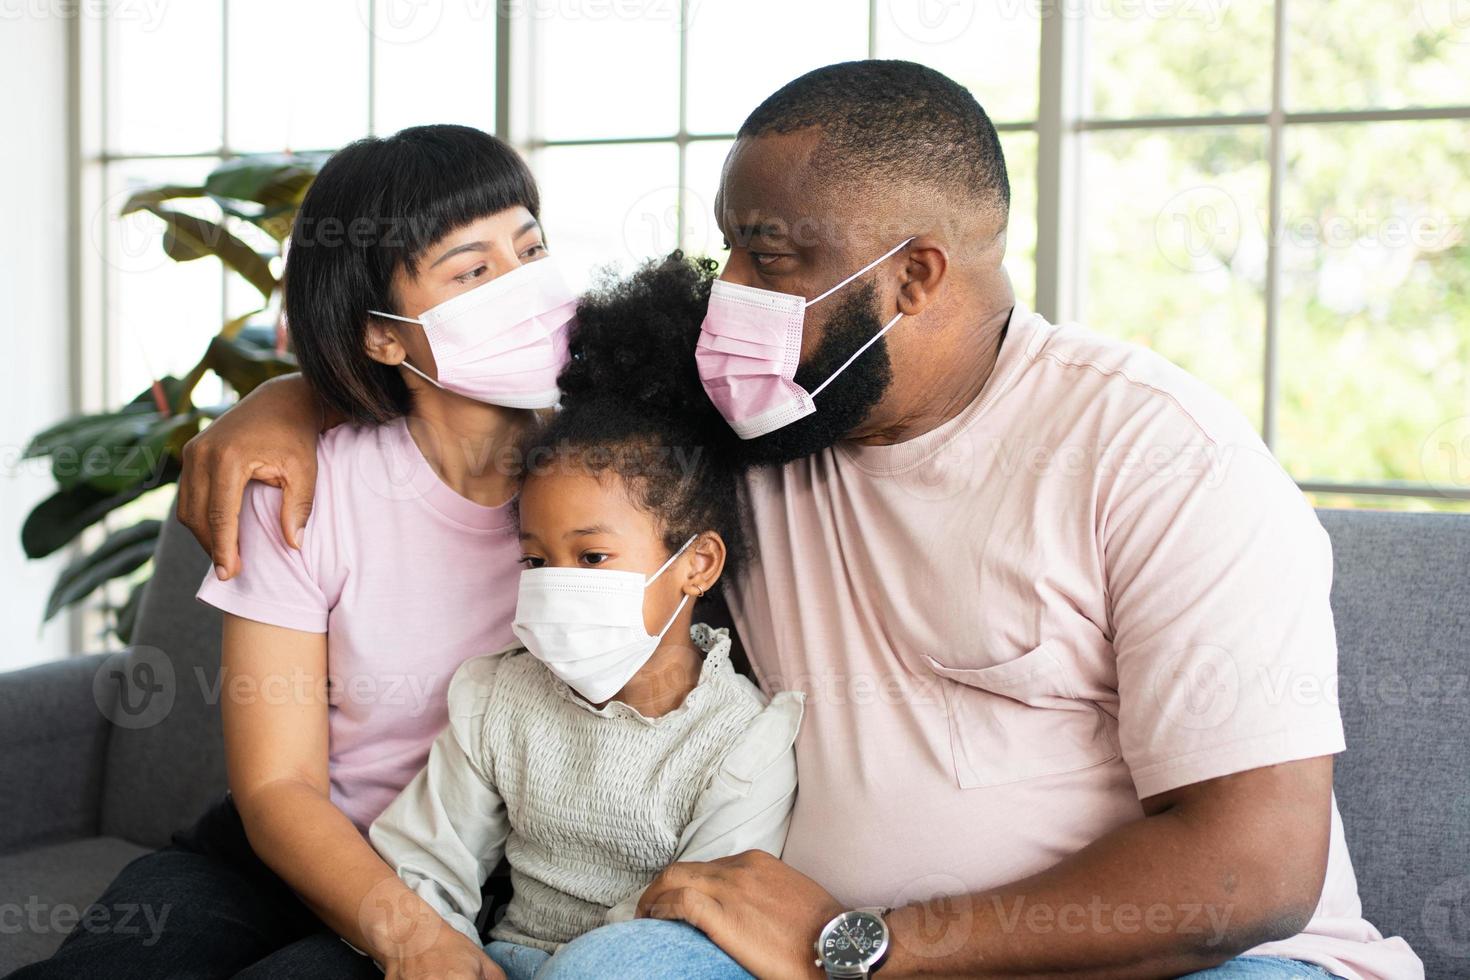 Mixed Race family sitting on the sofa and wearing medical face masks for against coronavirus world pandemic and stay quarantined together at home social distancing new normal lifestyle photo